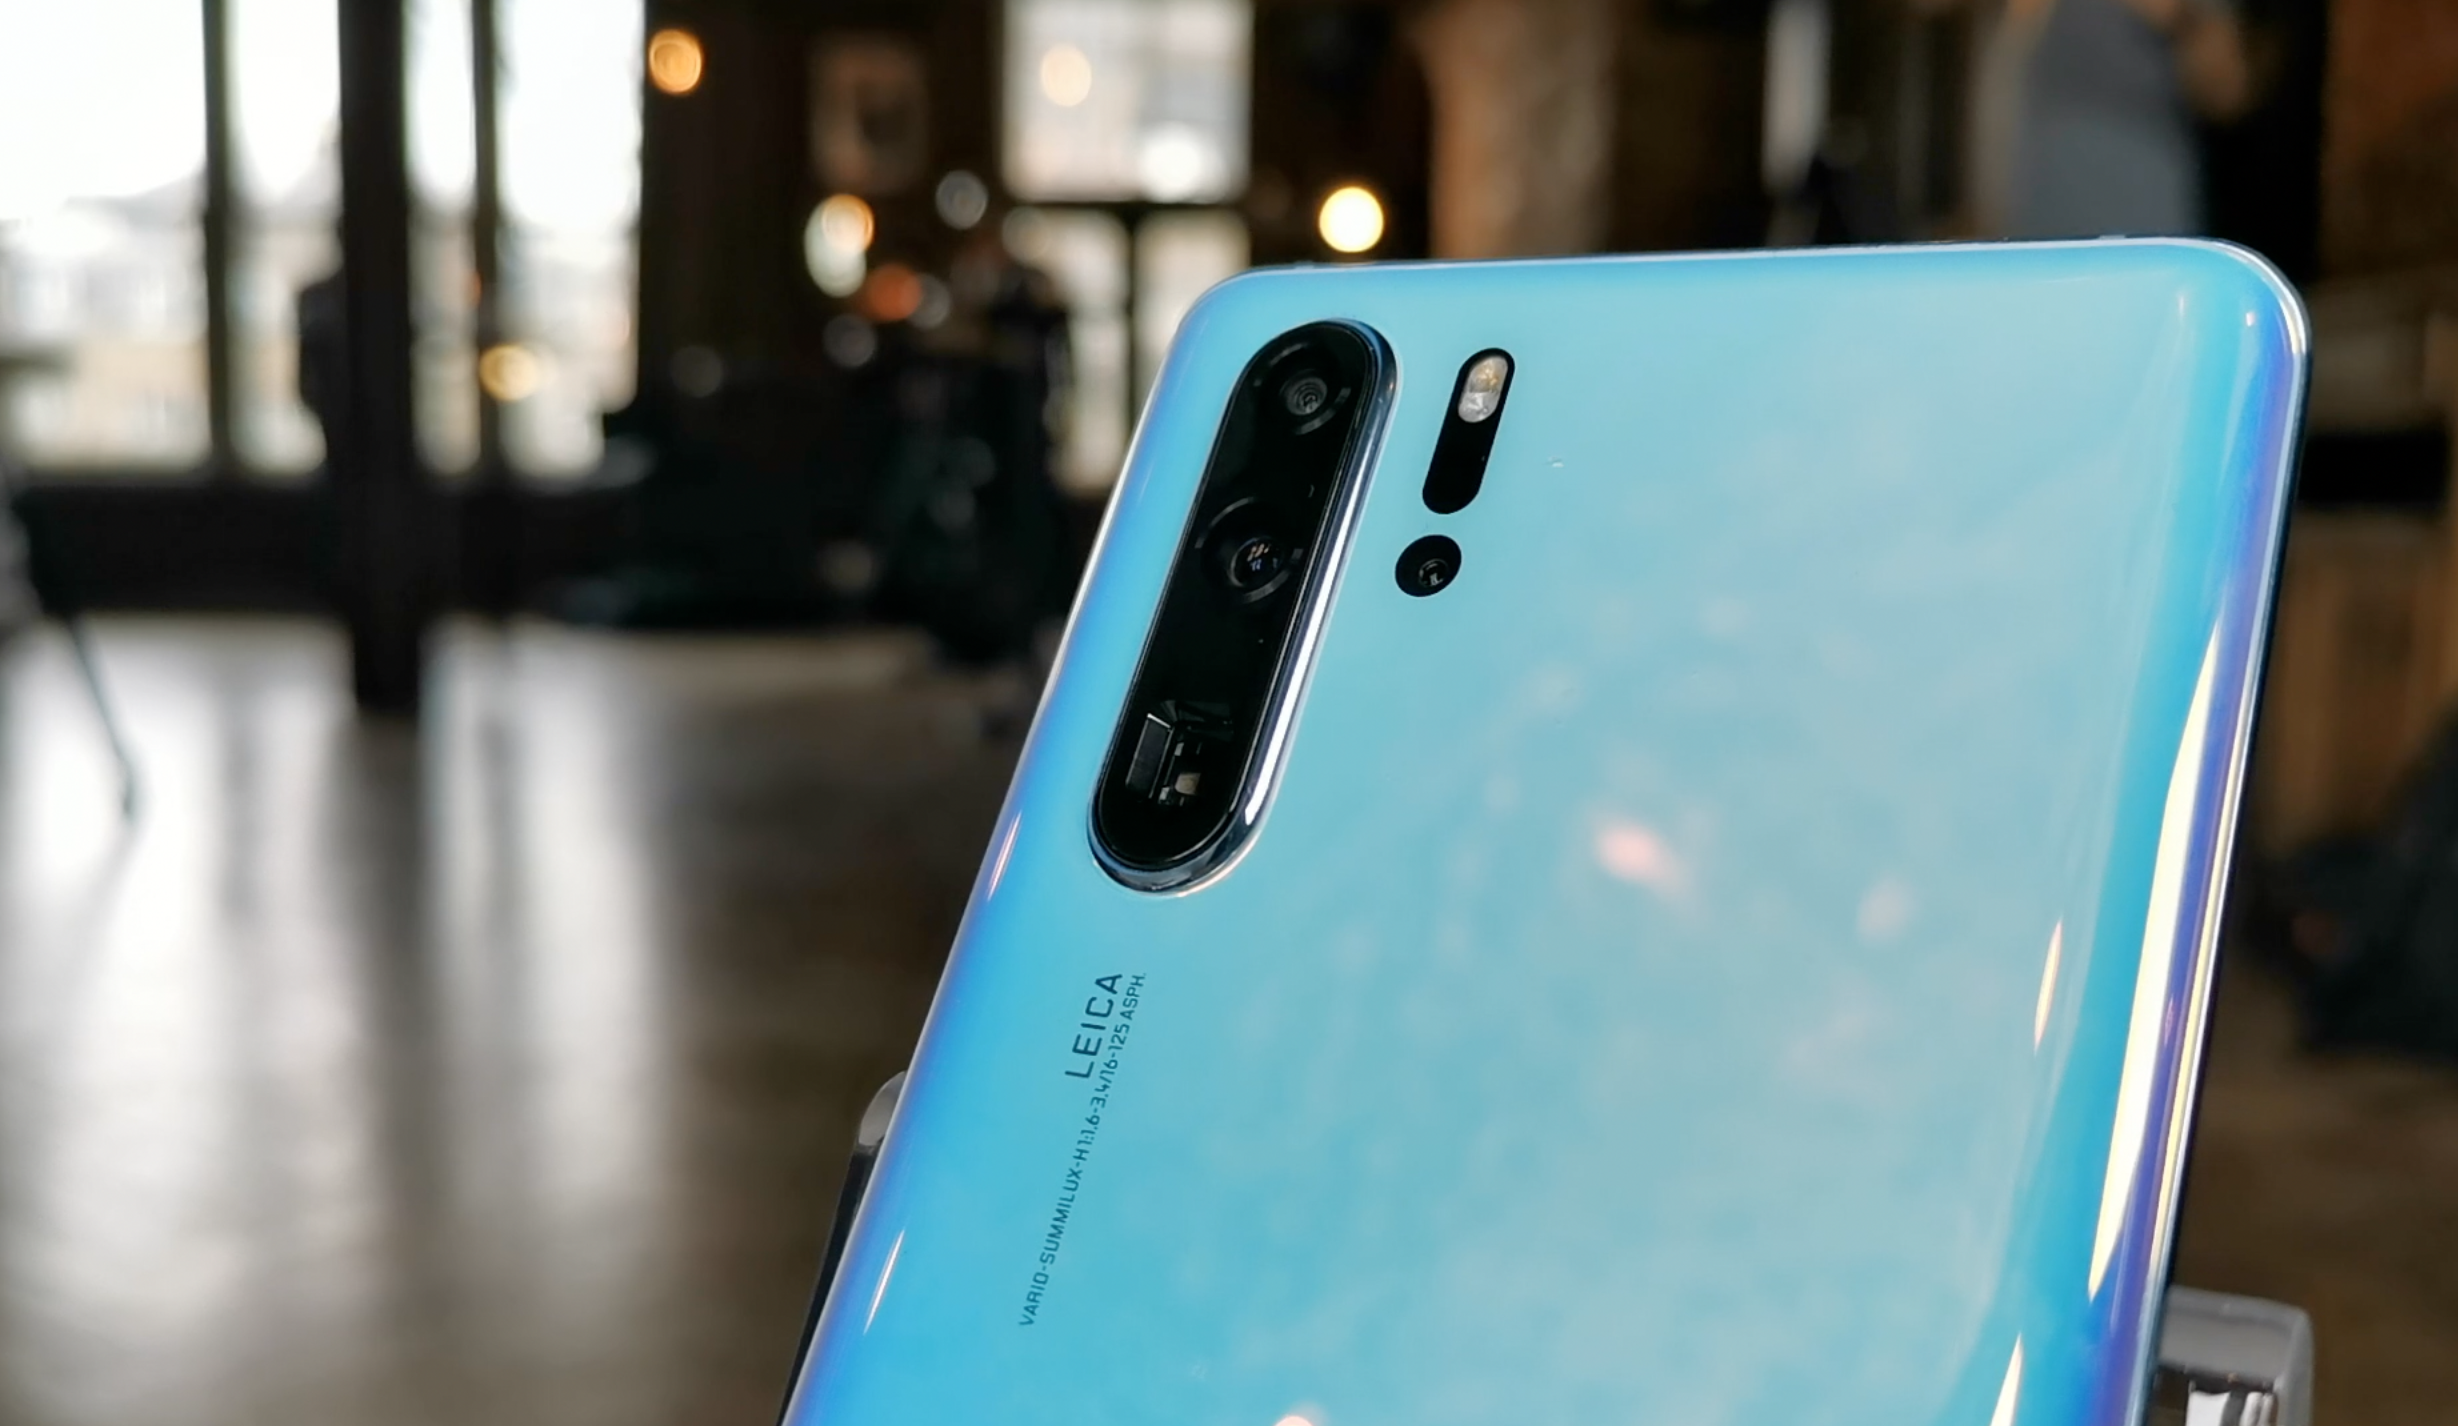 2. Install a monitoring app to locate your Huawei P30/P30 Pro